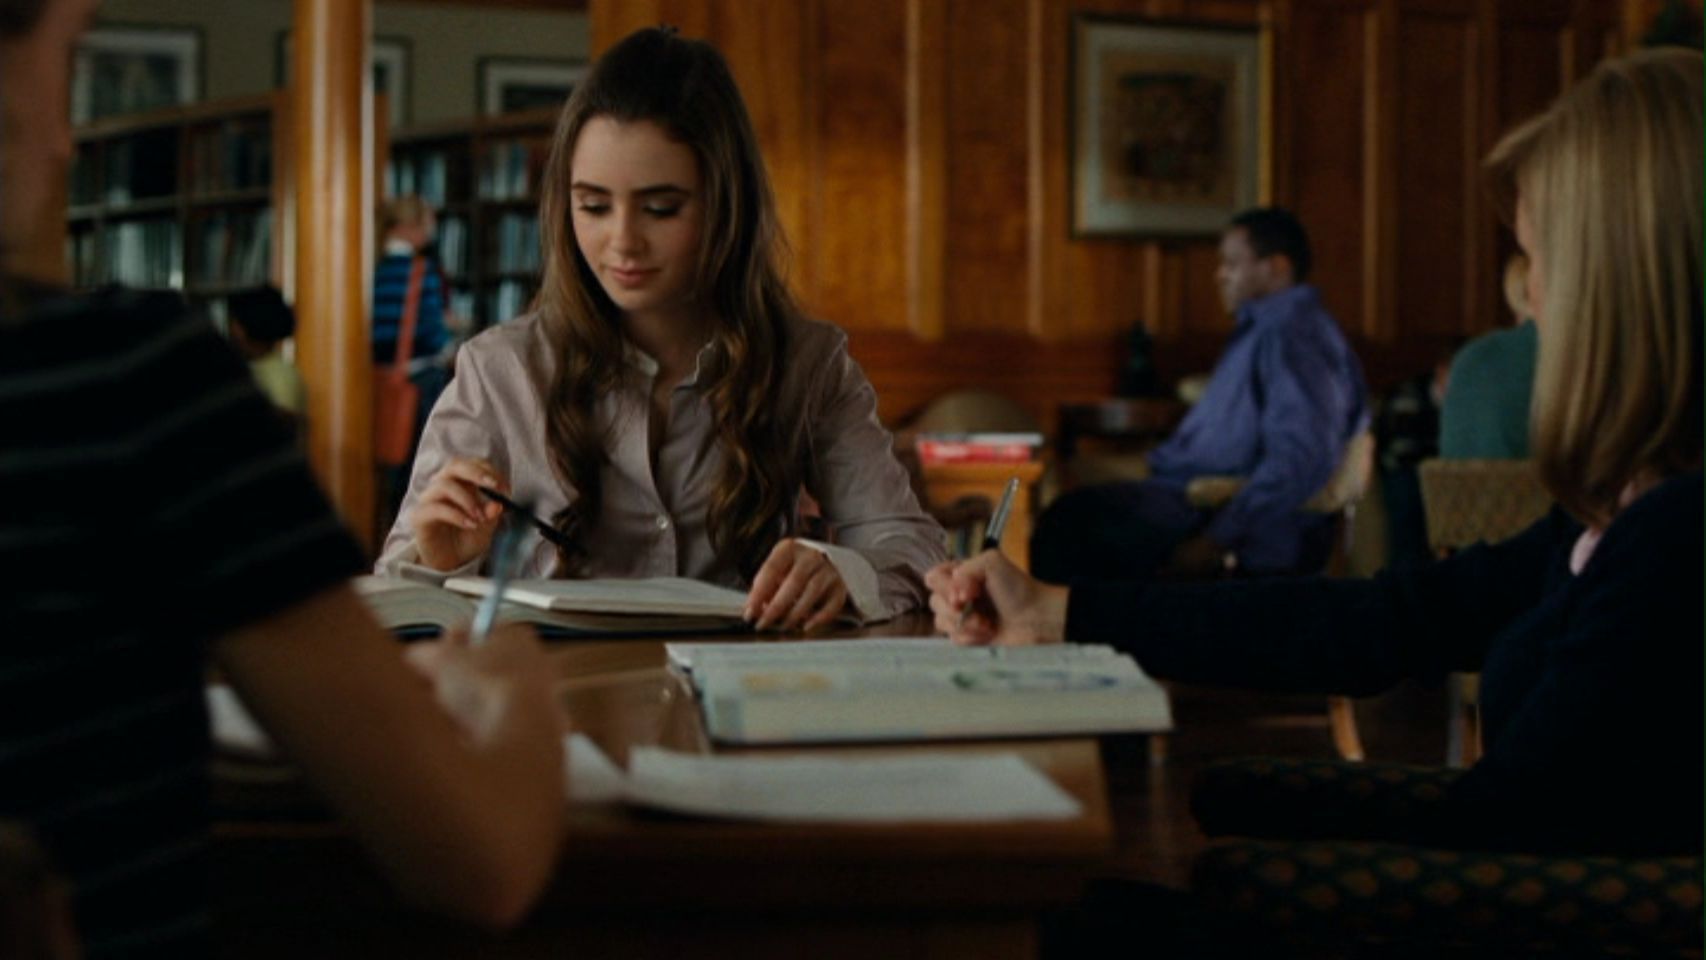 The Blind Side - Lily Collins Image (21307063) - Fanpop - Page 11